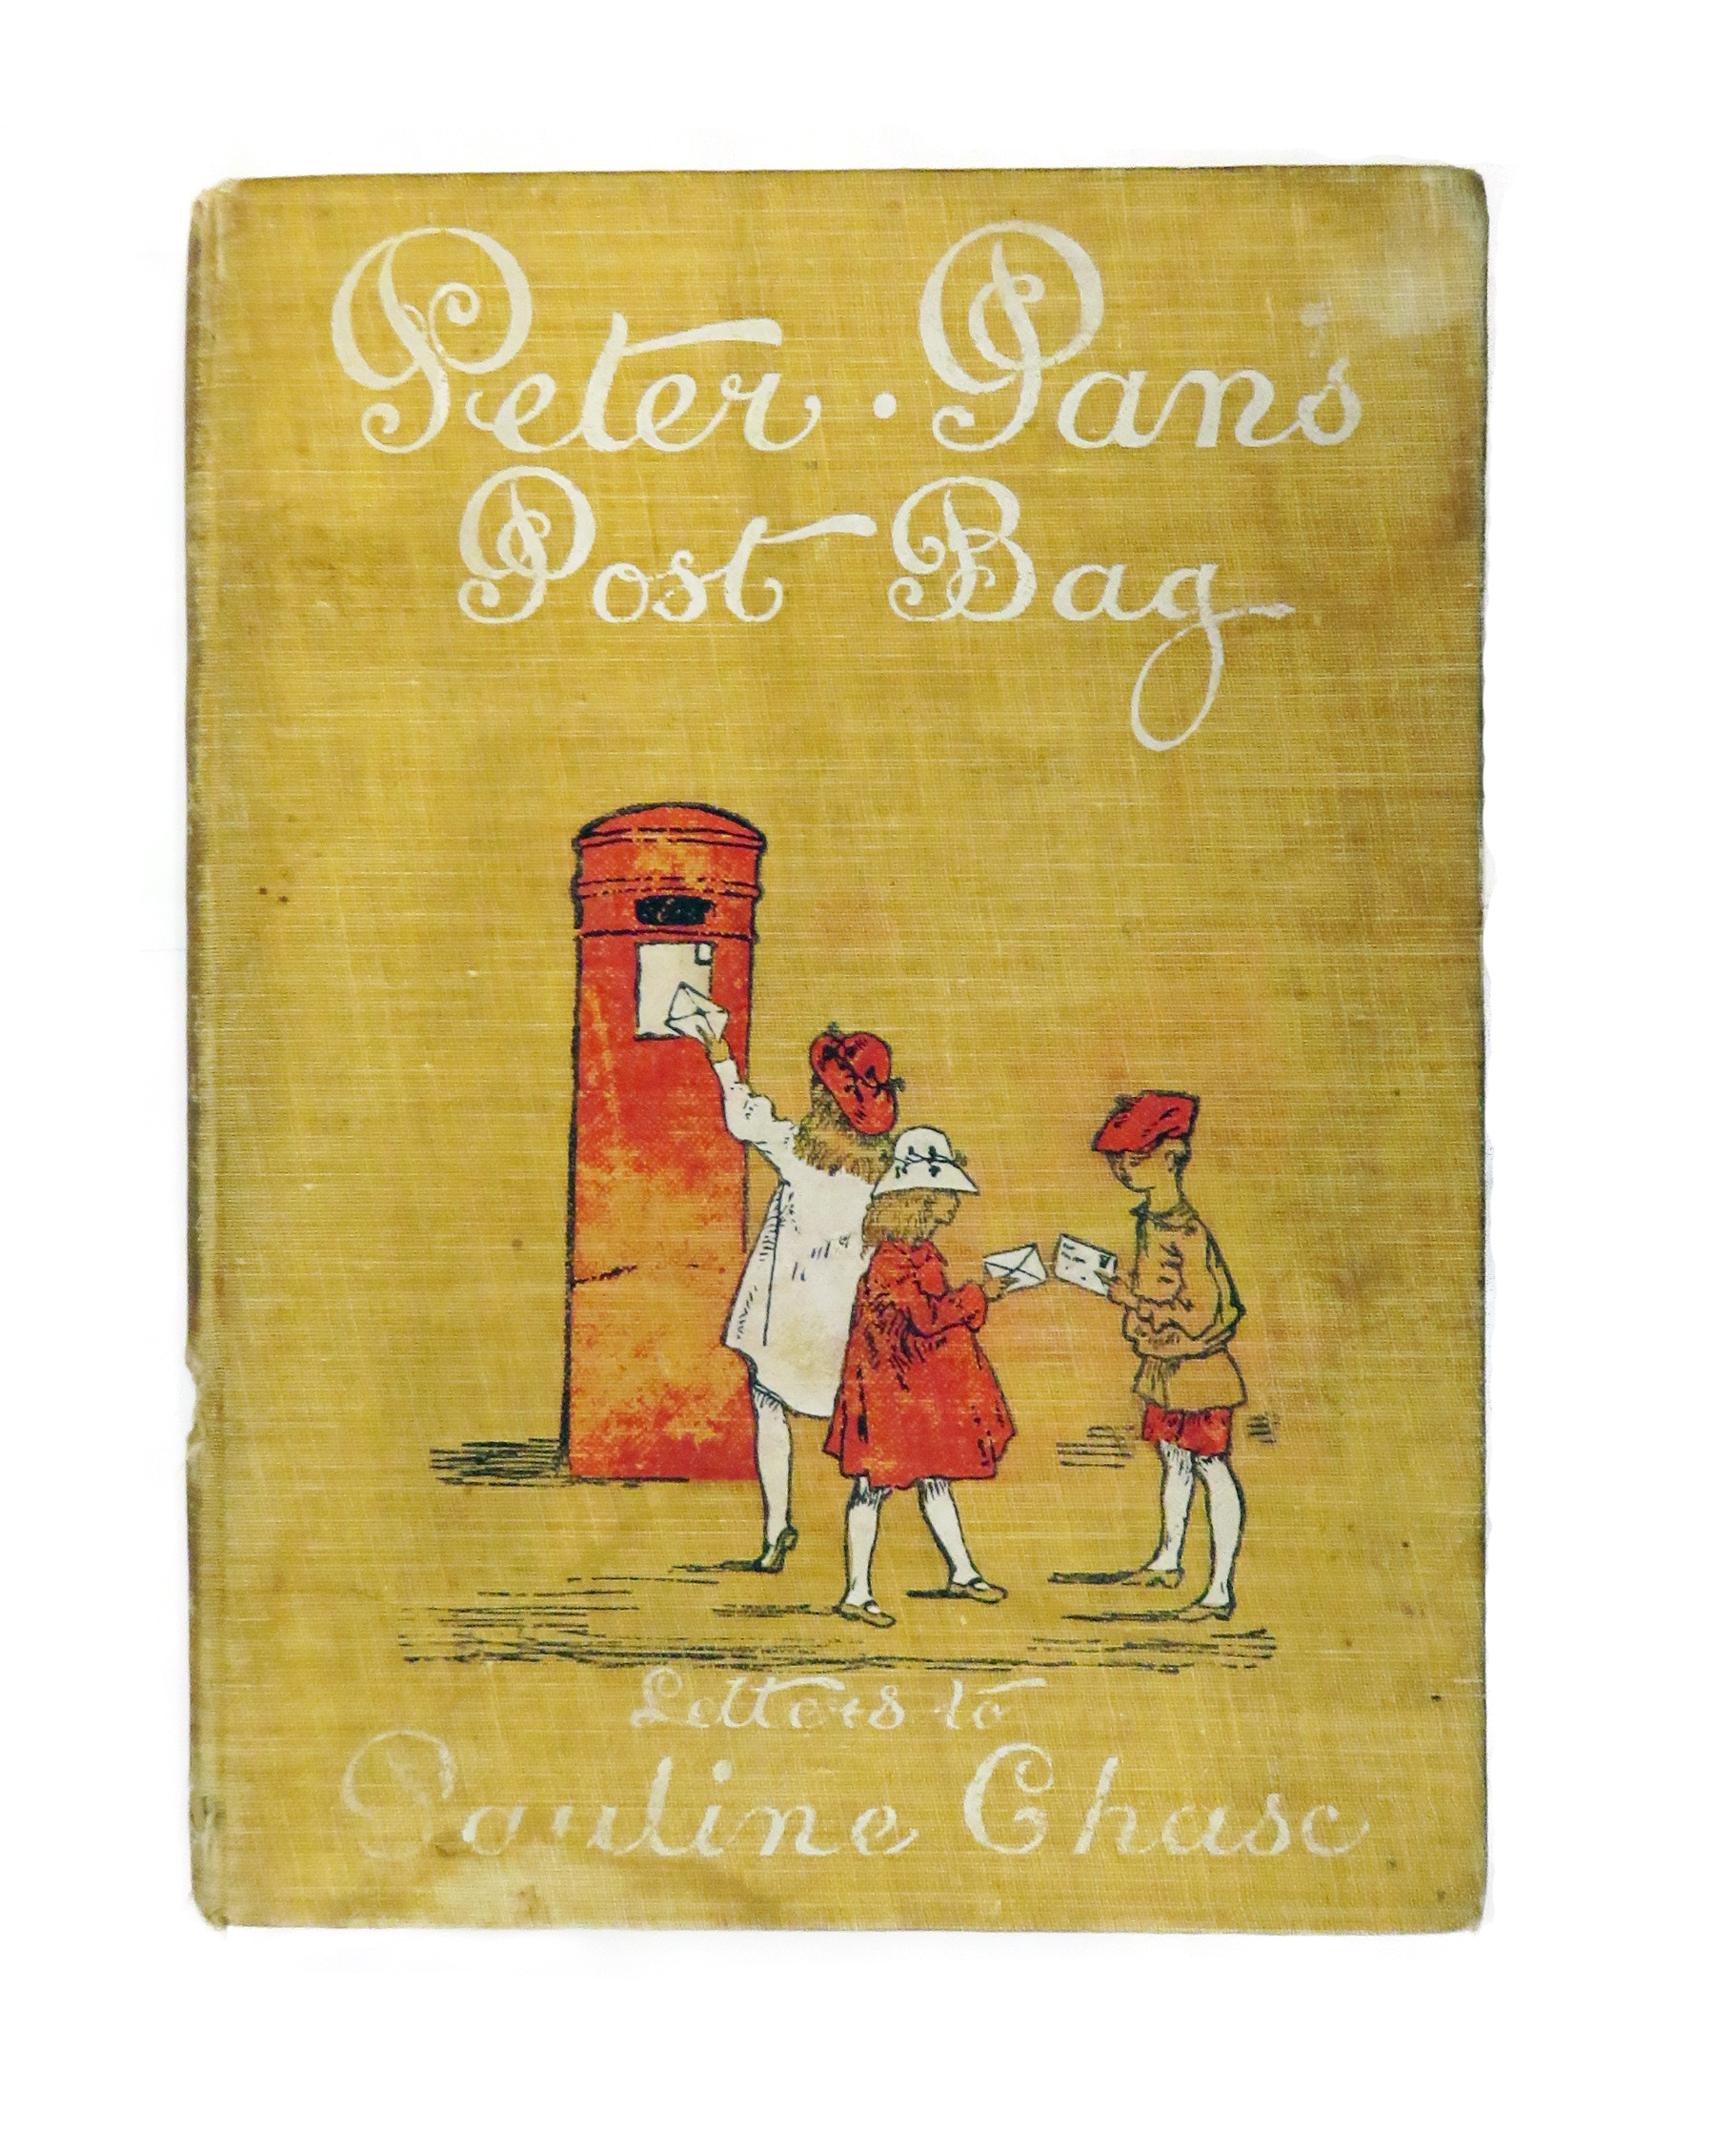 Peter Pan's Postbag. Letters to Pauline Chase